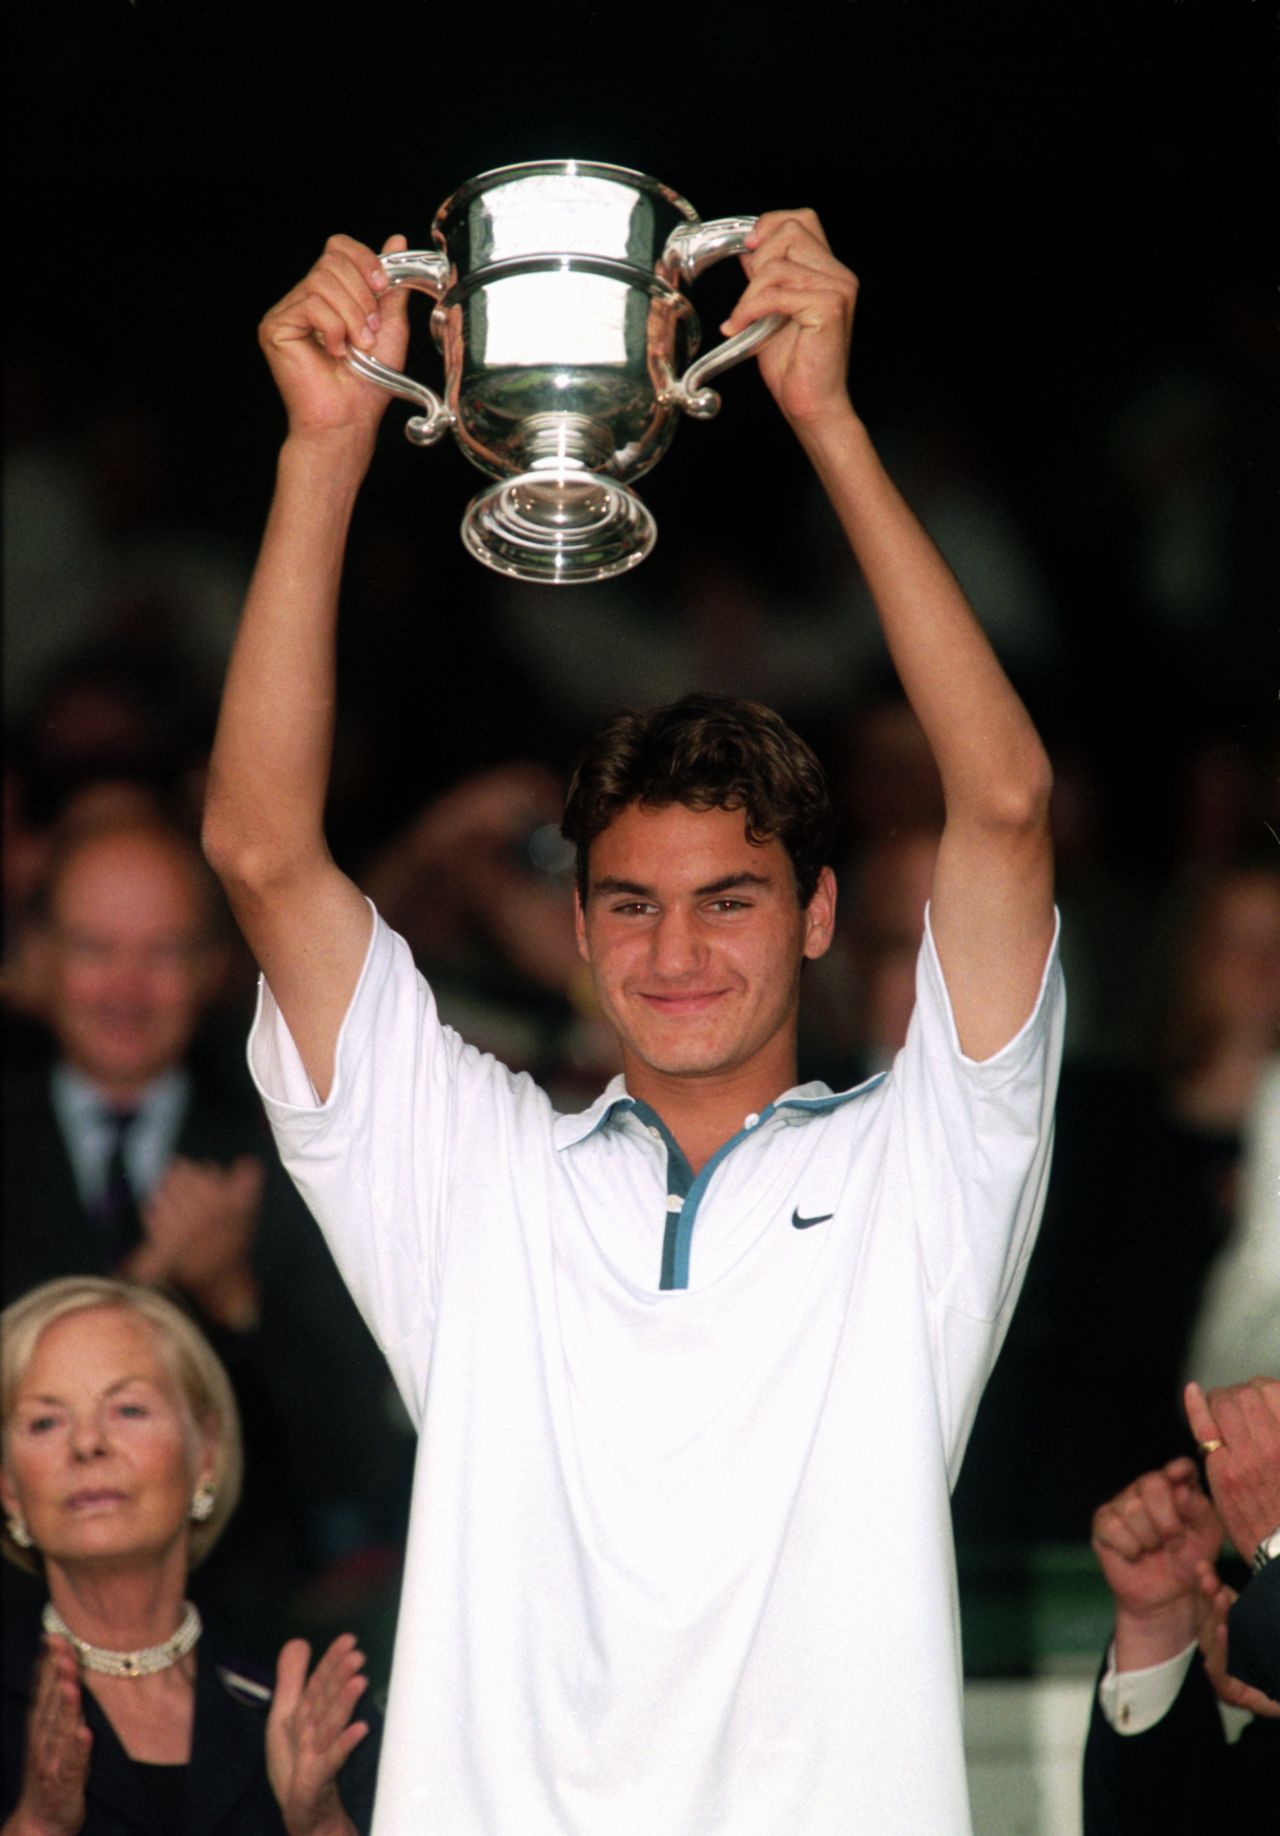 Federer enjoyed his first success at the All England Tennis Club in 1998, beating Georgia's Irakli Labadze in the boys' final. The Swiss turned pro later the same year.